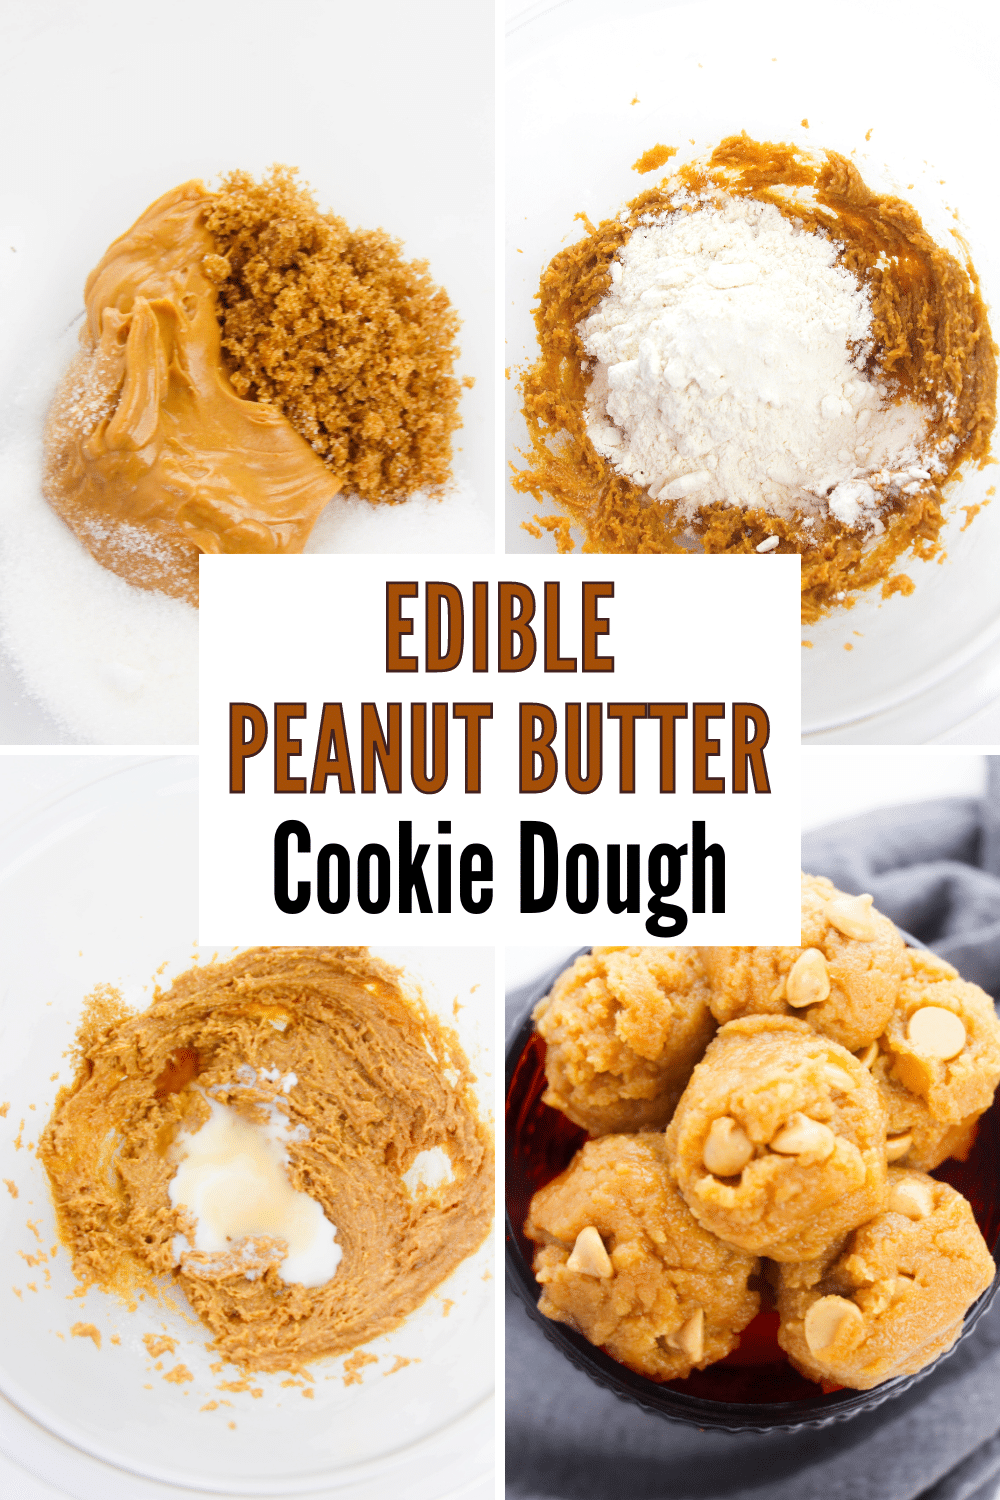 Bring back the nostalgic flavors of your childhood memories through this delightful Edible Peanut Butter Cookie Dough recipe. #ediblepeanutbuttercookiedough #cookies #ediblecookiedough #sweettooth #peanutbutterchips via @wondermomwannab